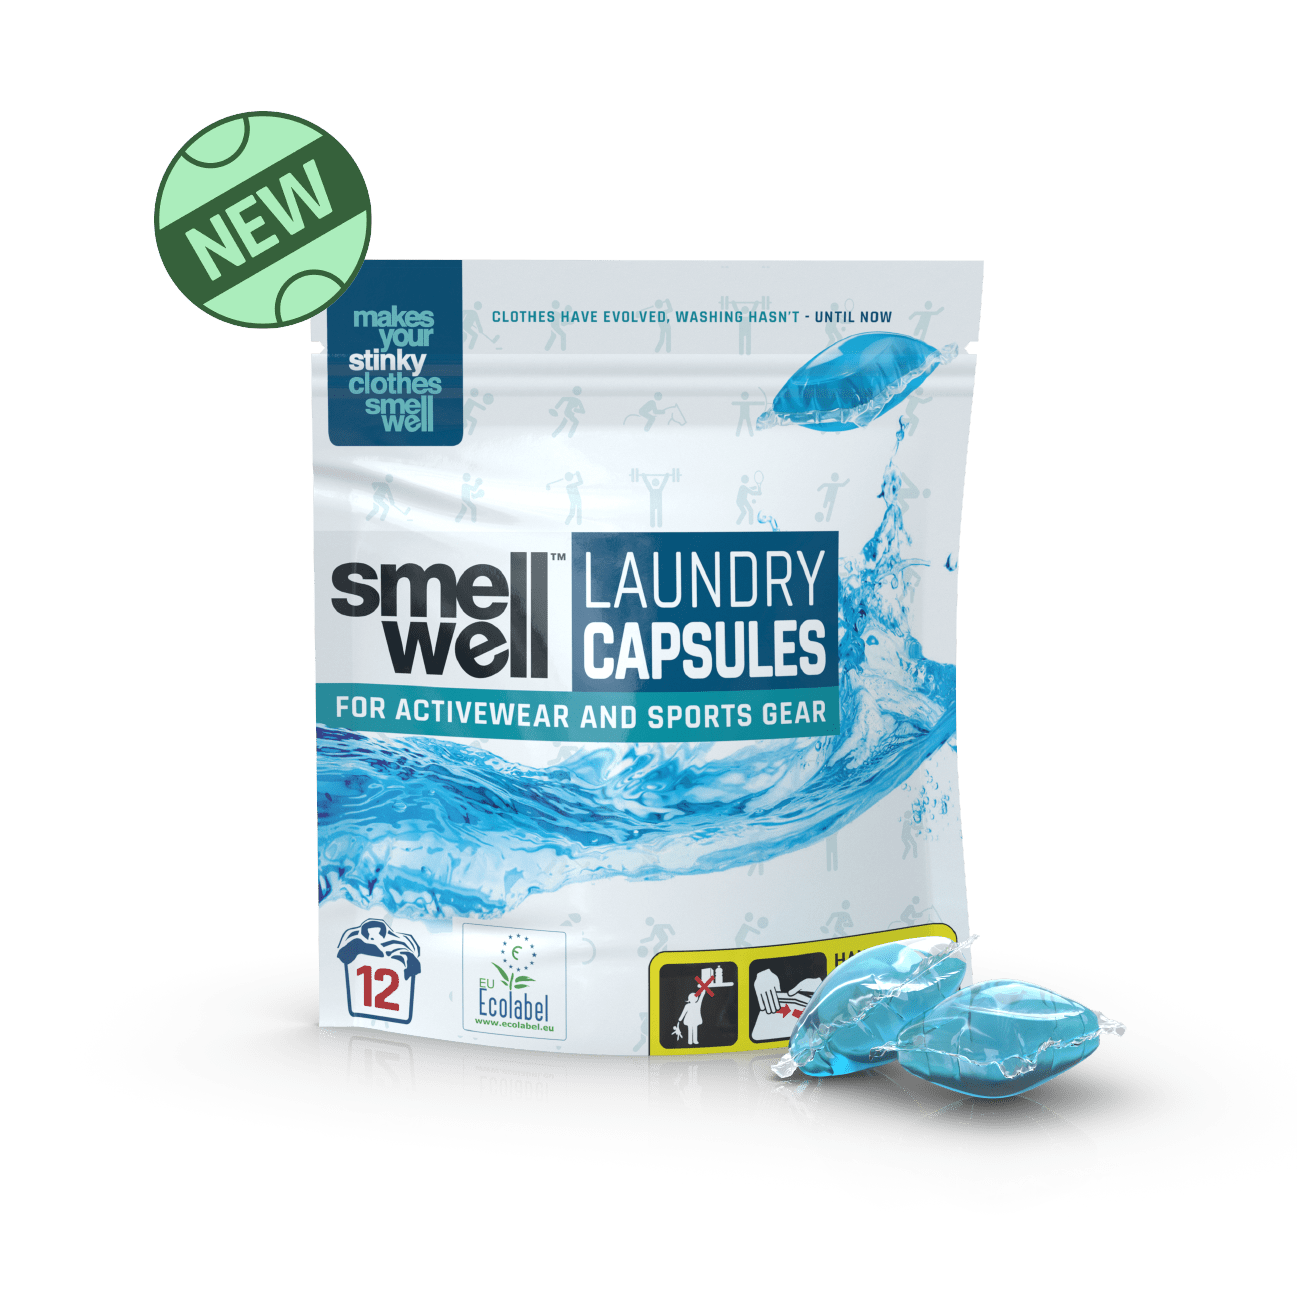 SmellWell Laundry Capsules - 1 Pack